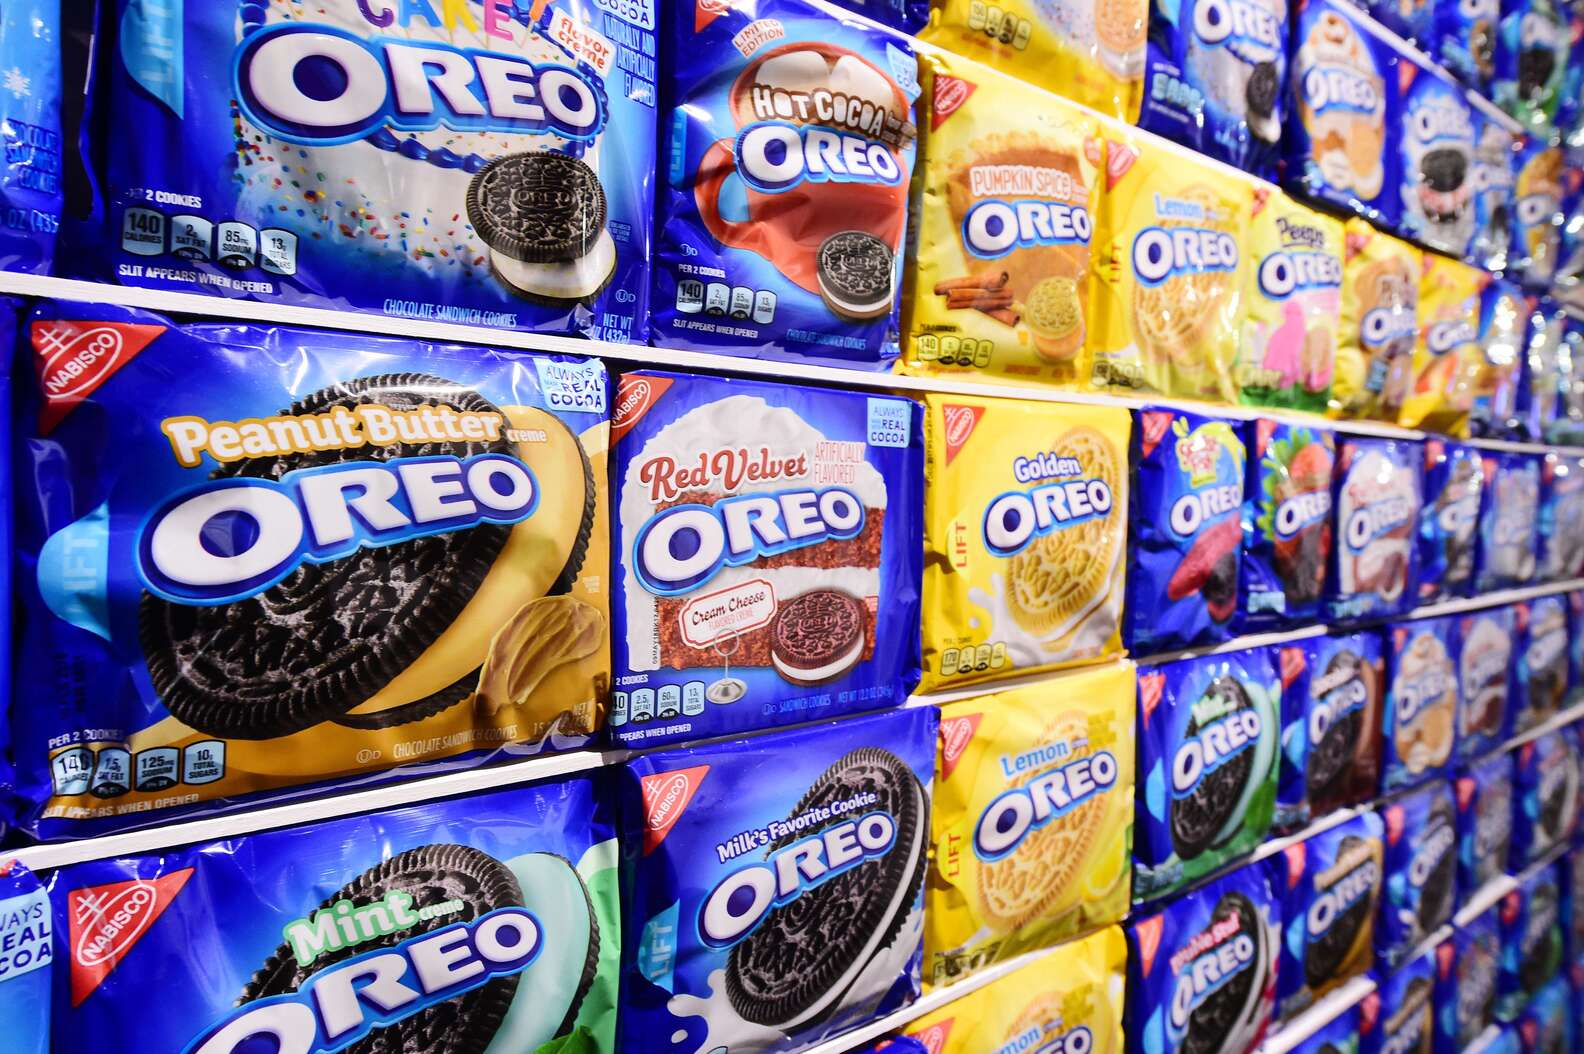 best-oreo-flavors-every-oreo-cookie-flavor-ranked-from-worst-to-best